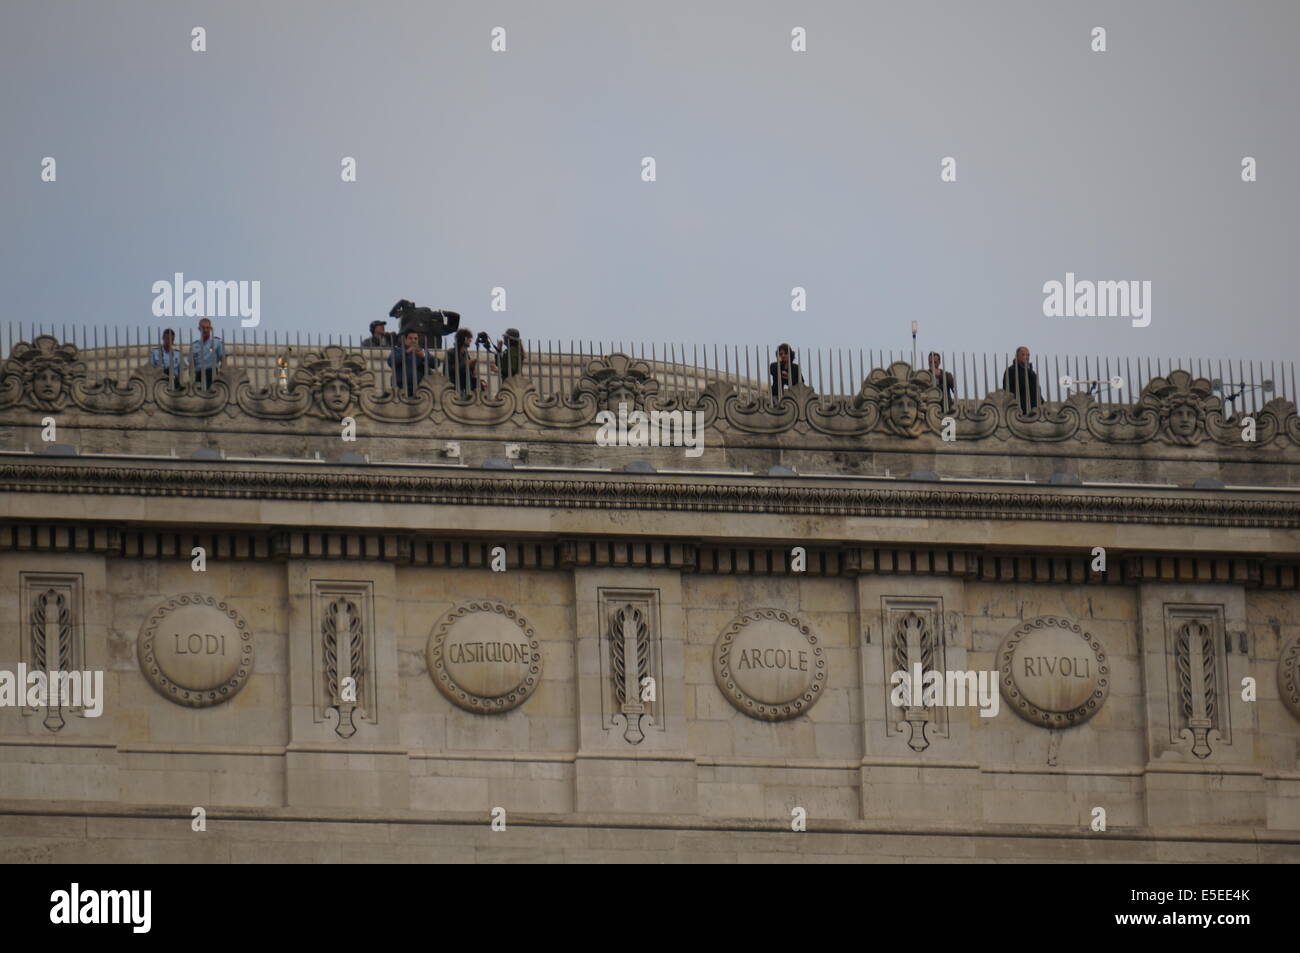 Journalists, soldiers on terrasse of Arc de Triomphe waiting for military parade on Avenue des Champs Elysees Bastille Day Paris Stock Photo